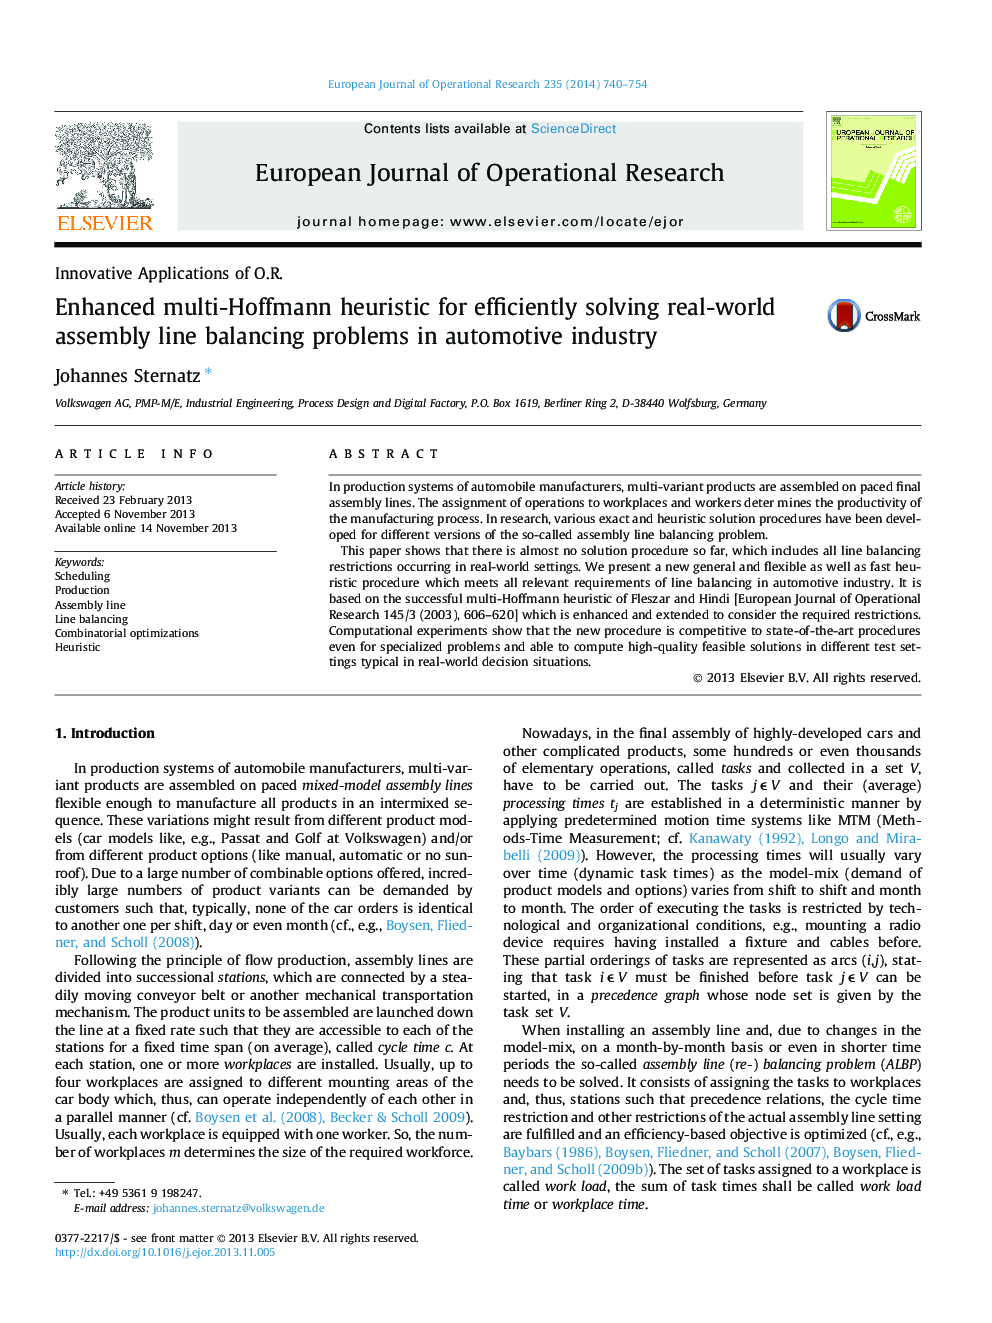 Enhanced multi-Hoffmann heuristic for efficiently solving real-world assembly line balancing problems in automotive industry